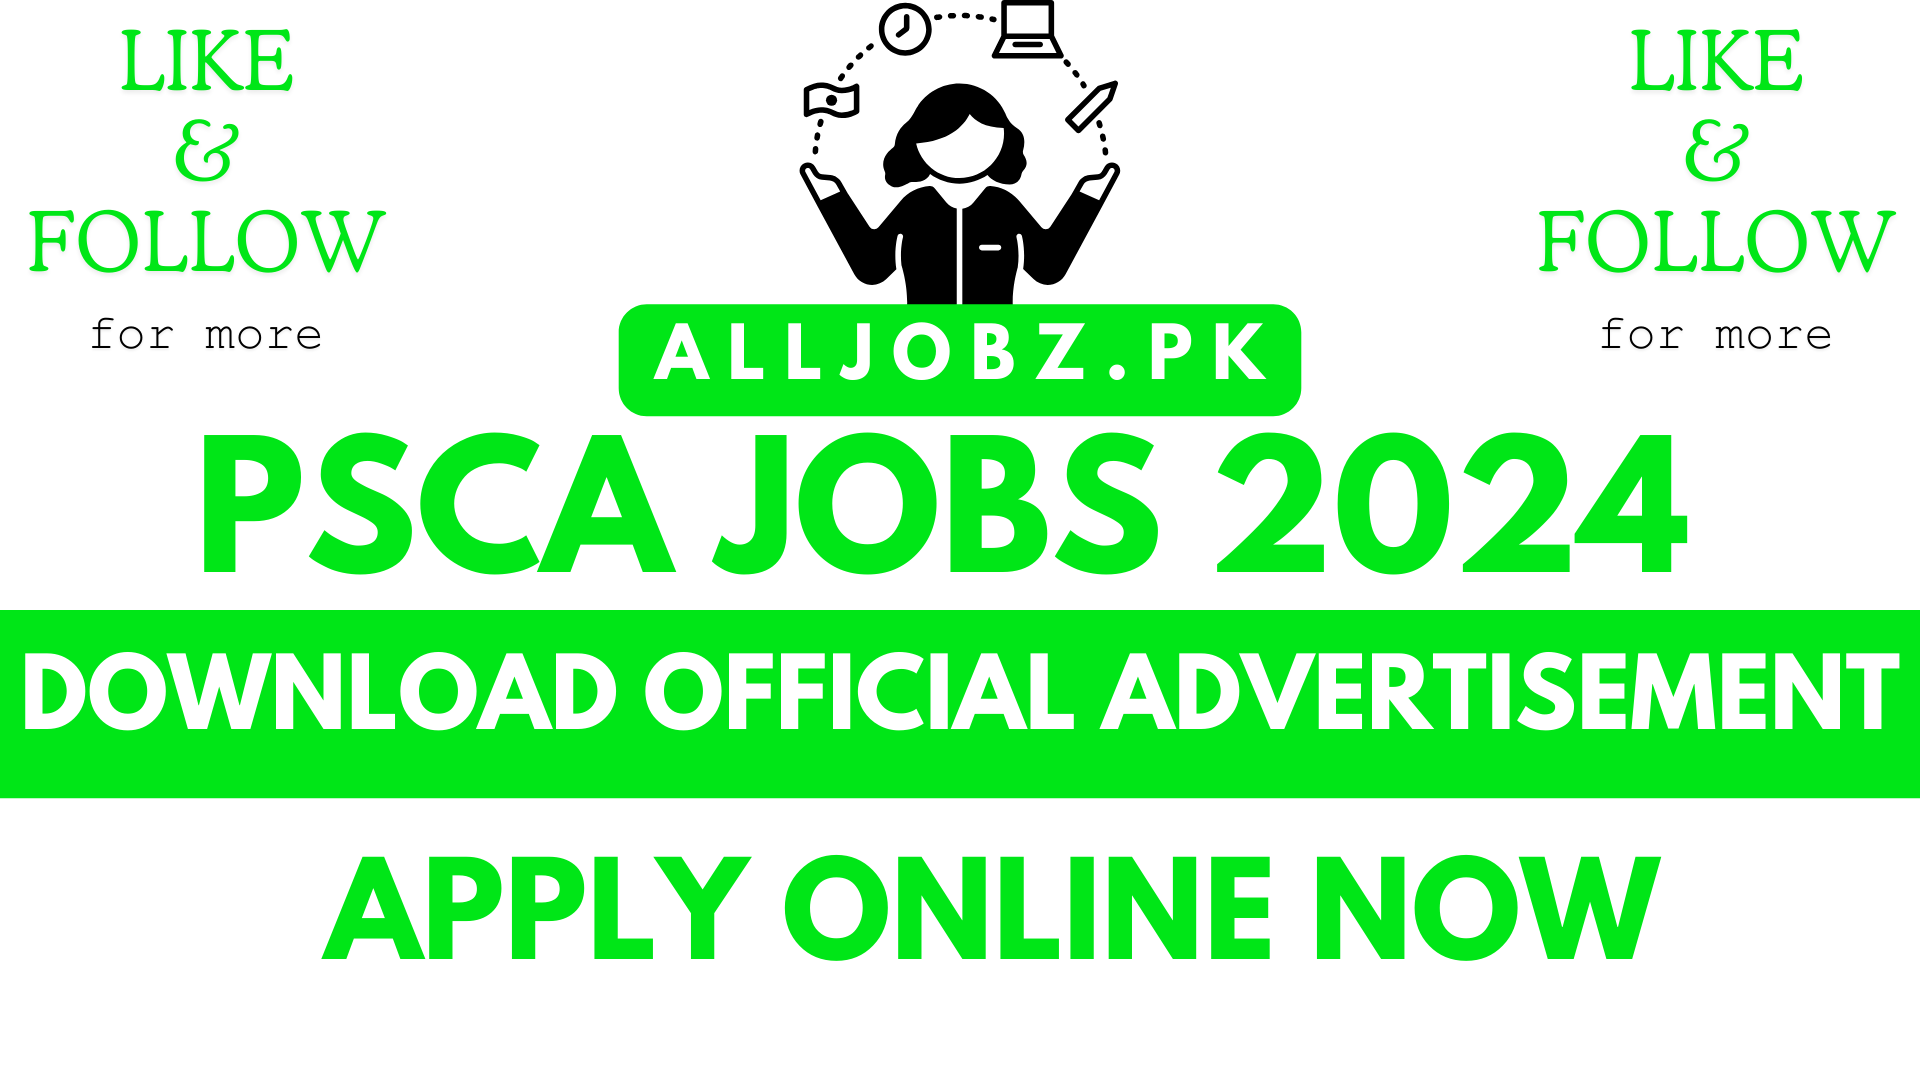 Punjab Safe City Authority (Psca) Jobs 2024, Punjab Safe City Authority, Psca Jobs 2024, Lahore, Government, Recruitment, Employment Opportunity, Application Procedure, Eligibility Criteria, Selection Process, Benefits, Career Growth, Competitive Salaries, Training Programs, Health Insurance, Retirement Plans, Deadline, Opportunity, Punjab, Ppic3 Lahore Jobs, Daily Express, Dunya Newspaper, Assistant Executive Officer, Supervisor, Technician, Junior Executive Officer, It Support Officer, Full Time Employment, Male, Female, Application Form, Written Test, Interview, Skills Assessment, Professional Development,